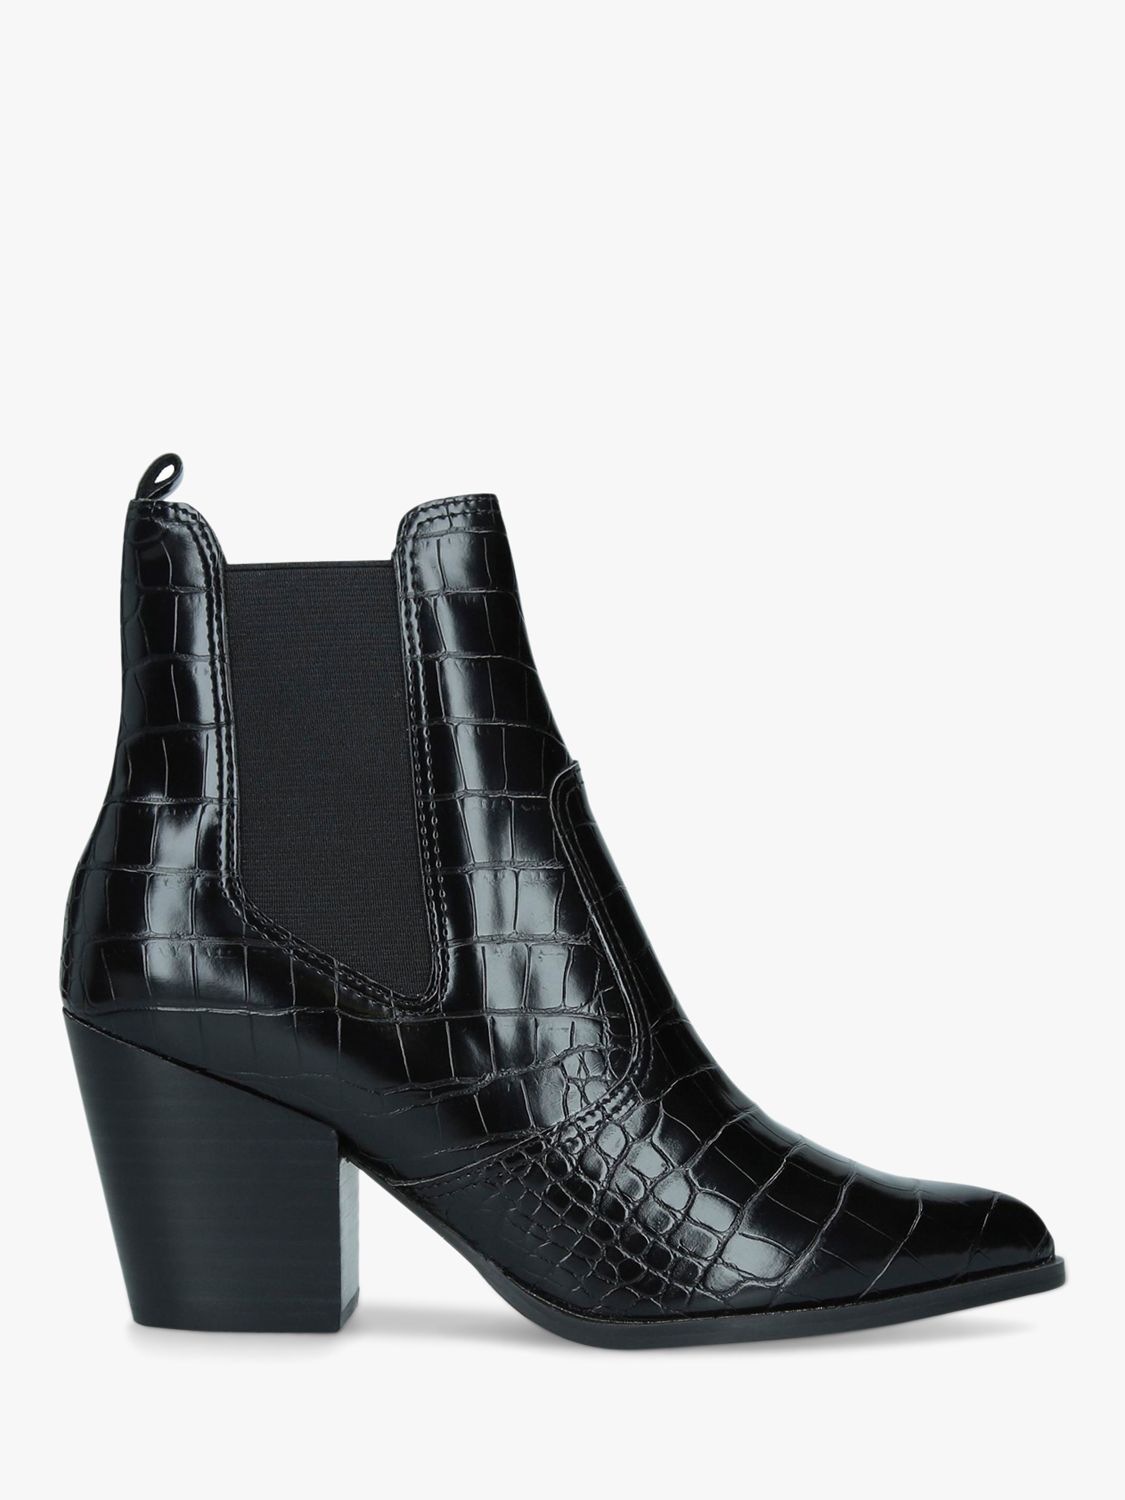 Steve Madden Patricia Ankle Boots, Black at John Lewis & Partners